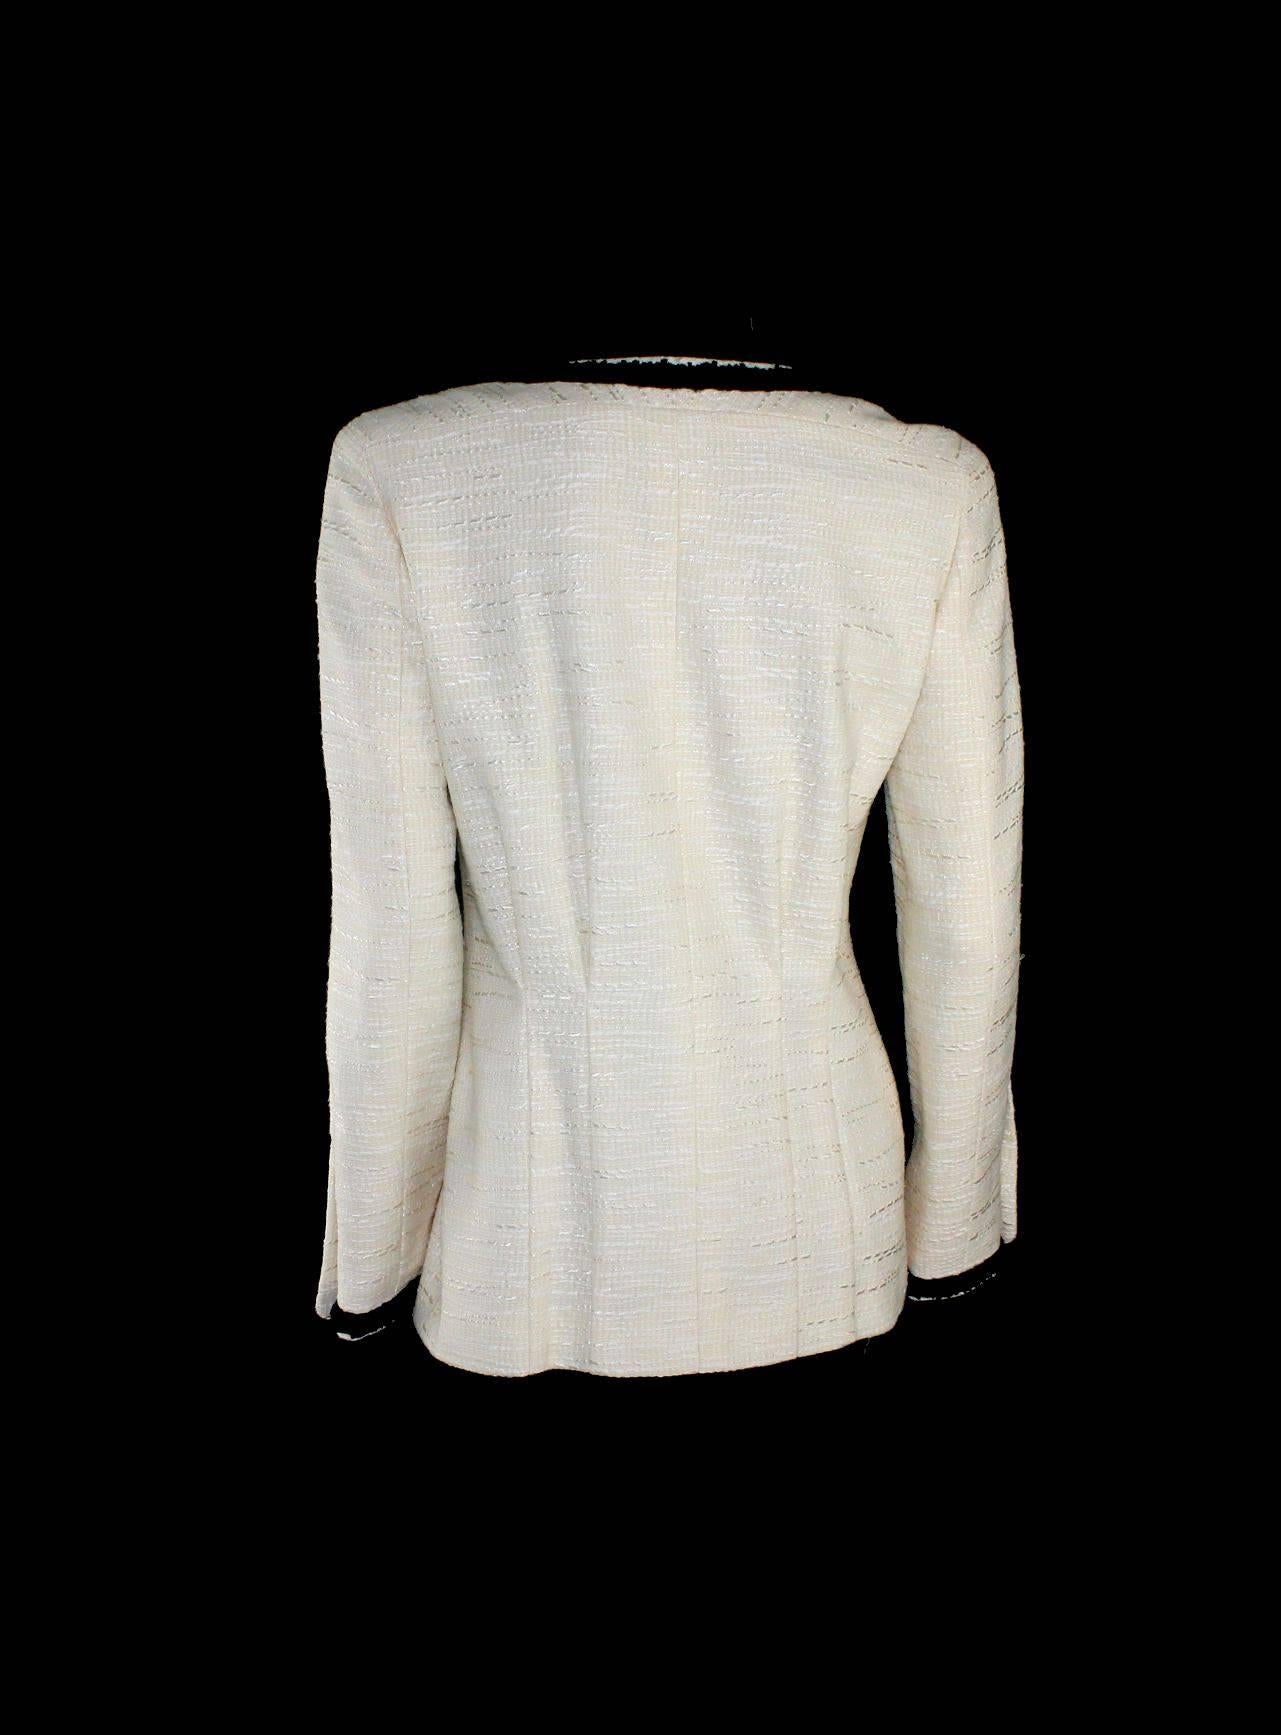 Chanel signature jacket
Designed by Karl Lagerfeld
Classic Chanel monochrome signature style that never goes out of style
Ivory tweed with black trimming
Two front pockets
Beautifully fitted back
CC logo buttons
Made in France
Dry Clean Only
Costume